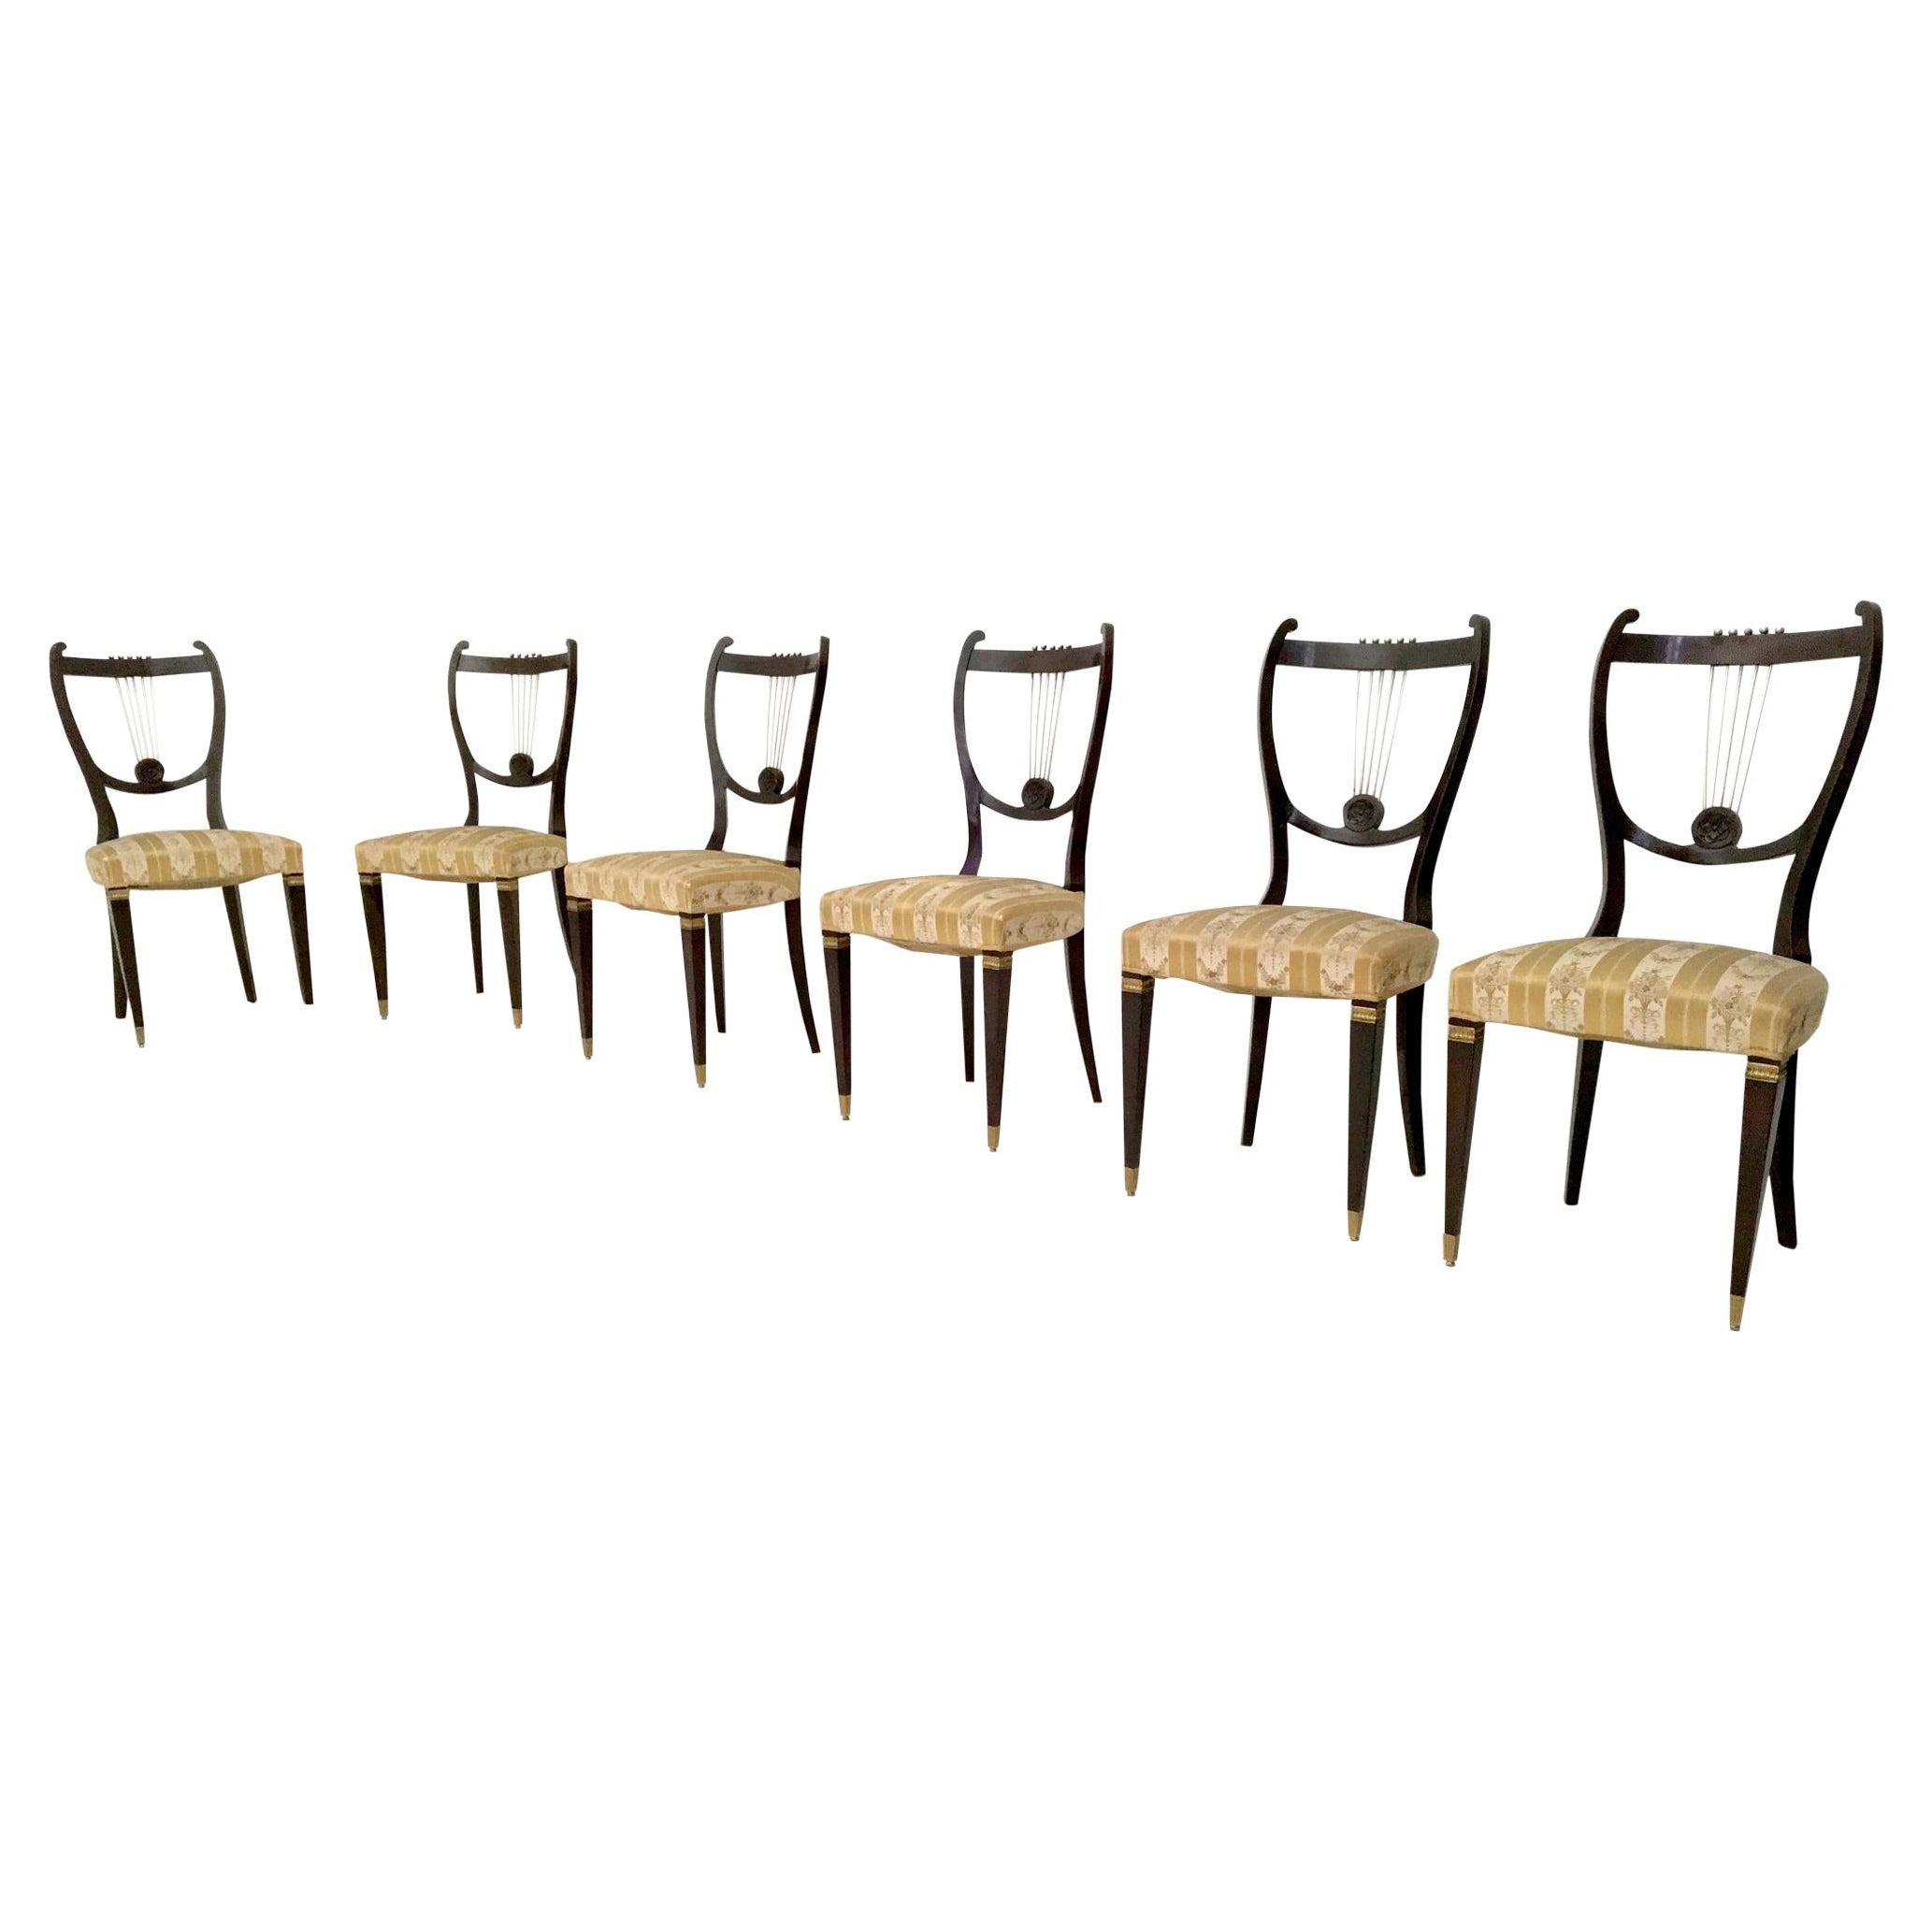 Set of Six Vintage Beech and Brass Dining Chairs with Goldenrod Fabric, Italy